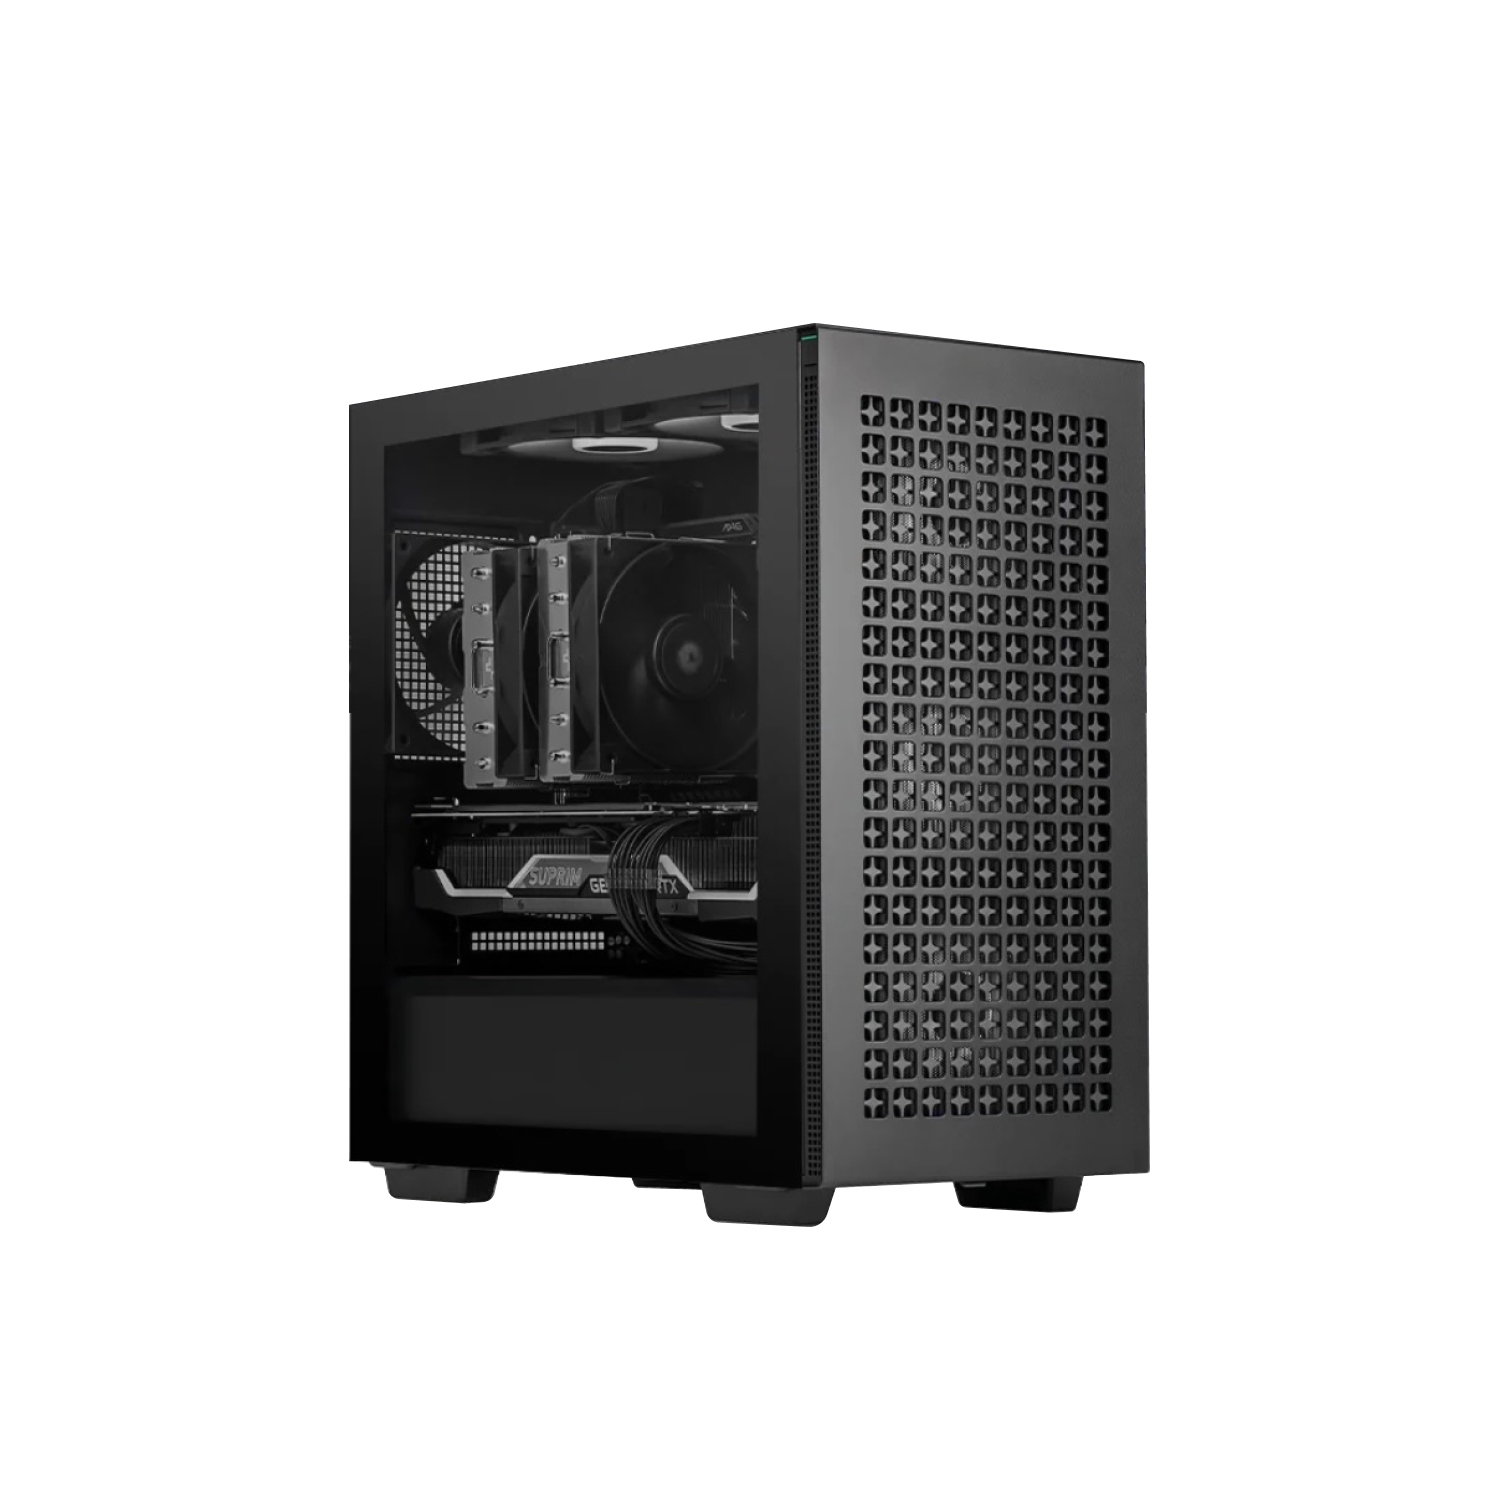 Zonic Business Custom PC, Intel Core i9-13900, 24 Cores, 1 TB NVME M.2 SSD, 32 GB DDR5 RAM, Mid-Tower Case, Build in WIFI ,Keyboard, and Mouse, Windows 11 Pro